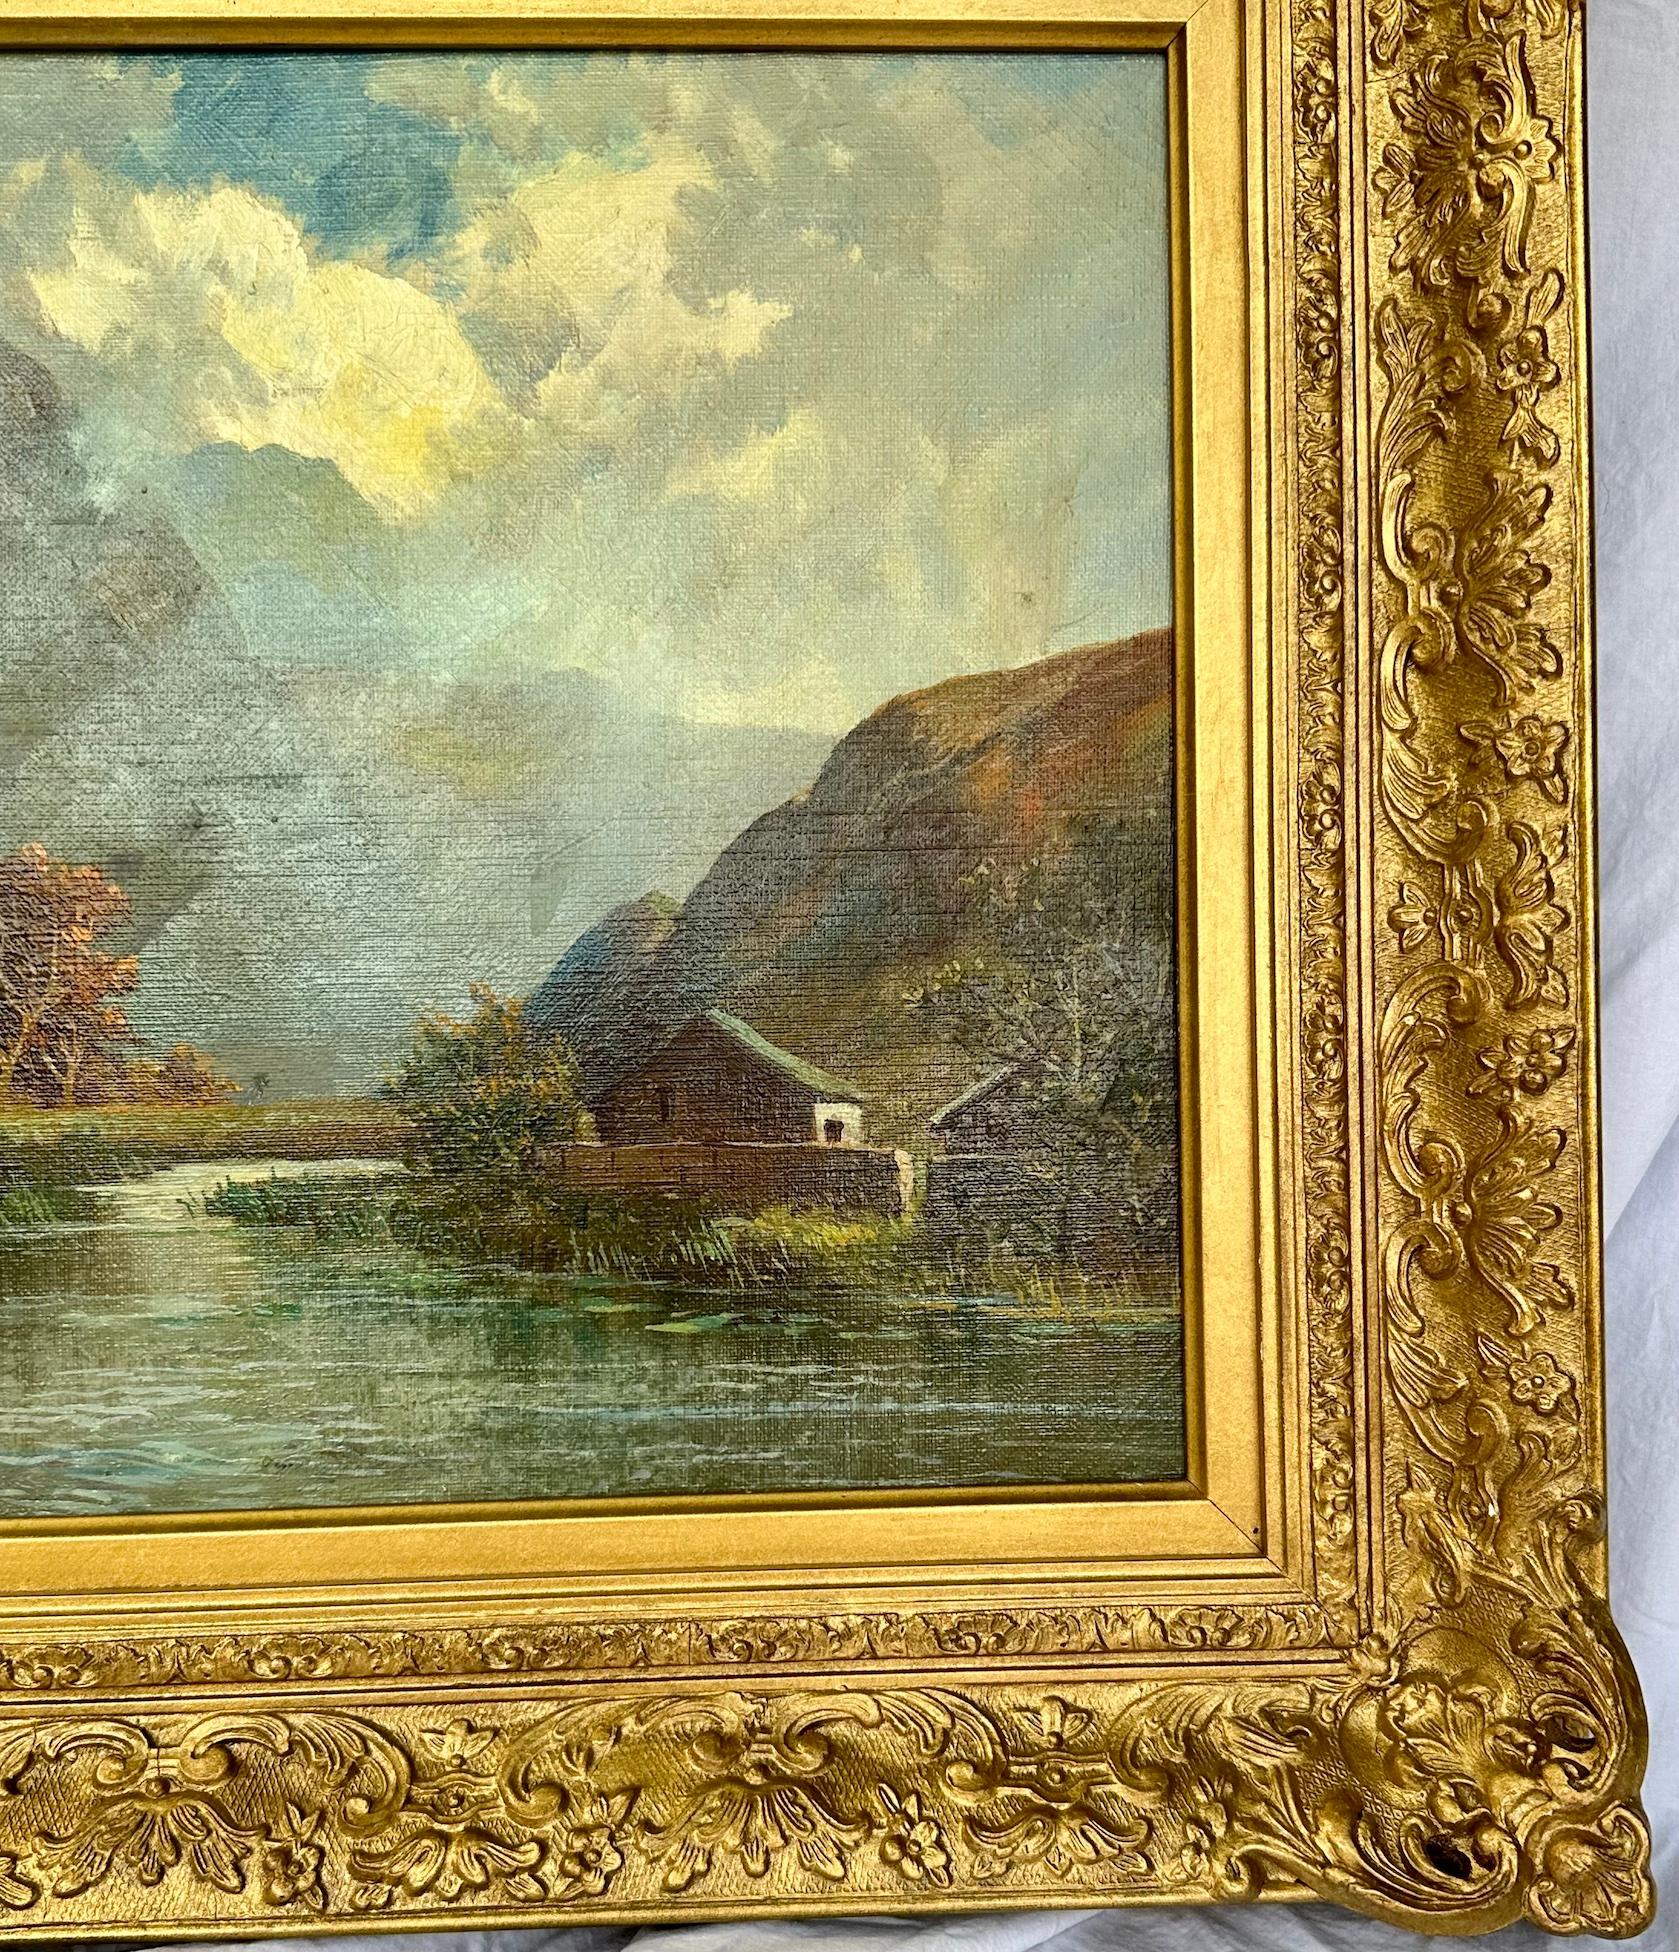 Antique Scottish Highland Loch landscape, with sunlit streaming onto the water - Brown Landscape Painting by Francis E. Jamieson